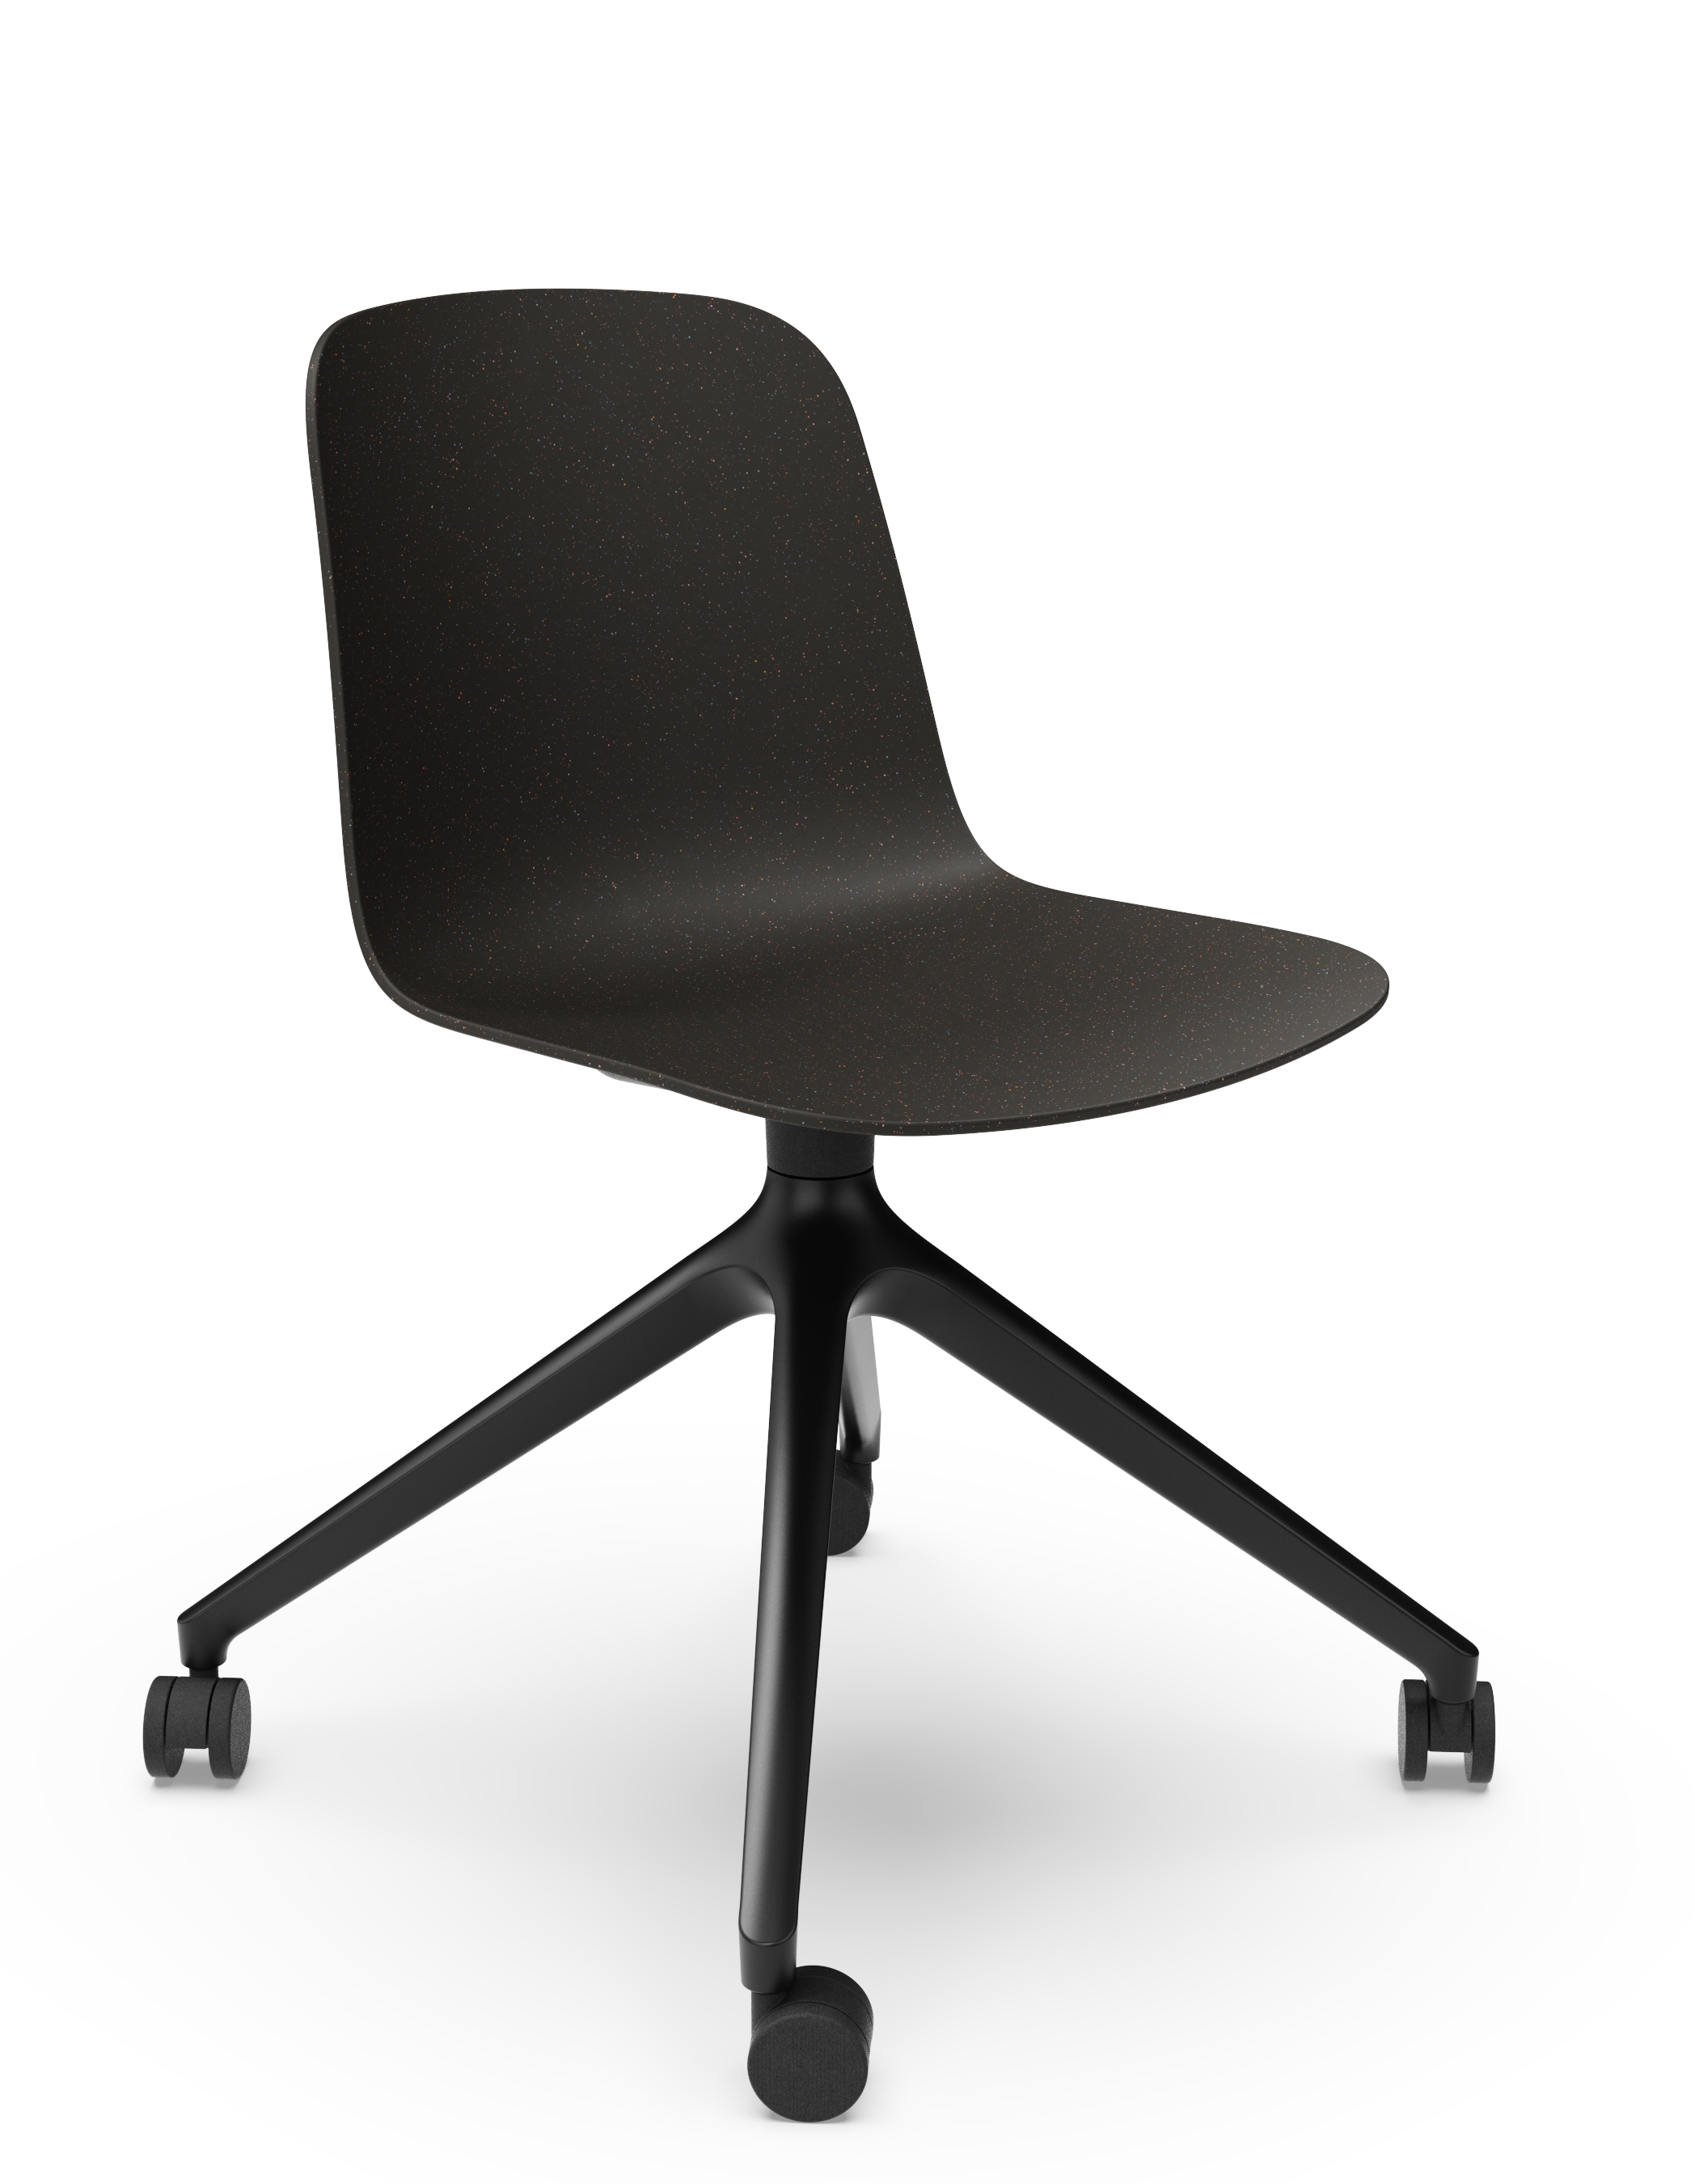 WS - Moto Side Chair - 4 Star Base with Castors - Black - Front Angle